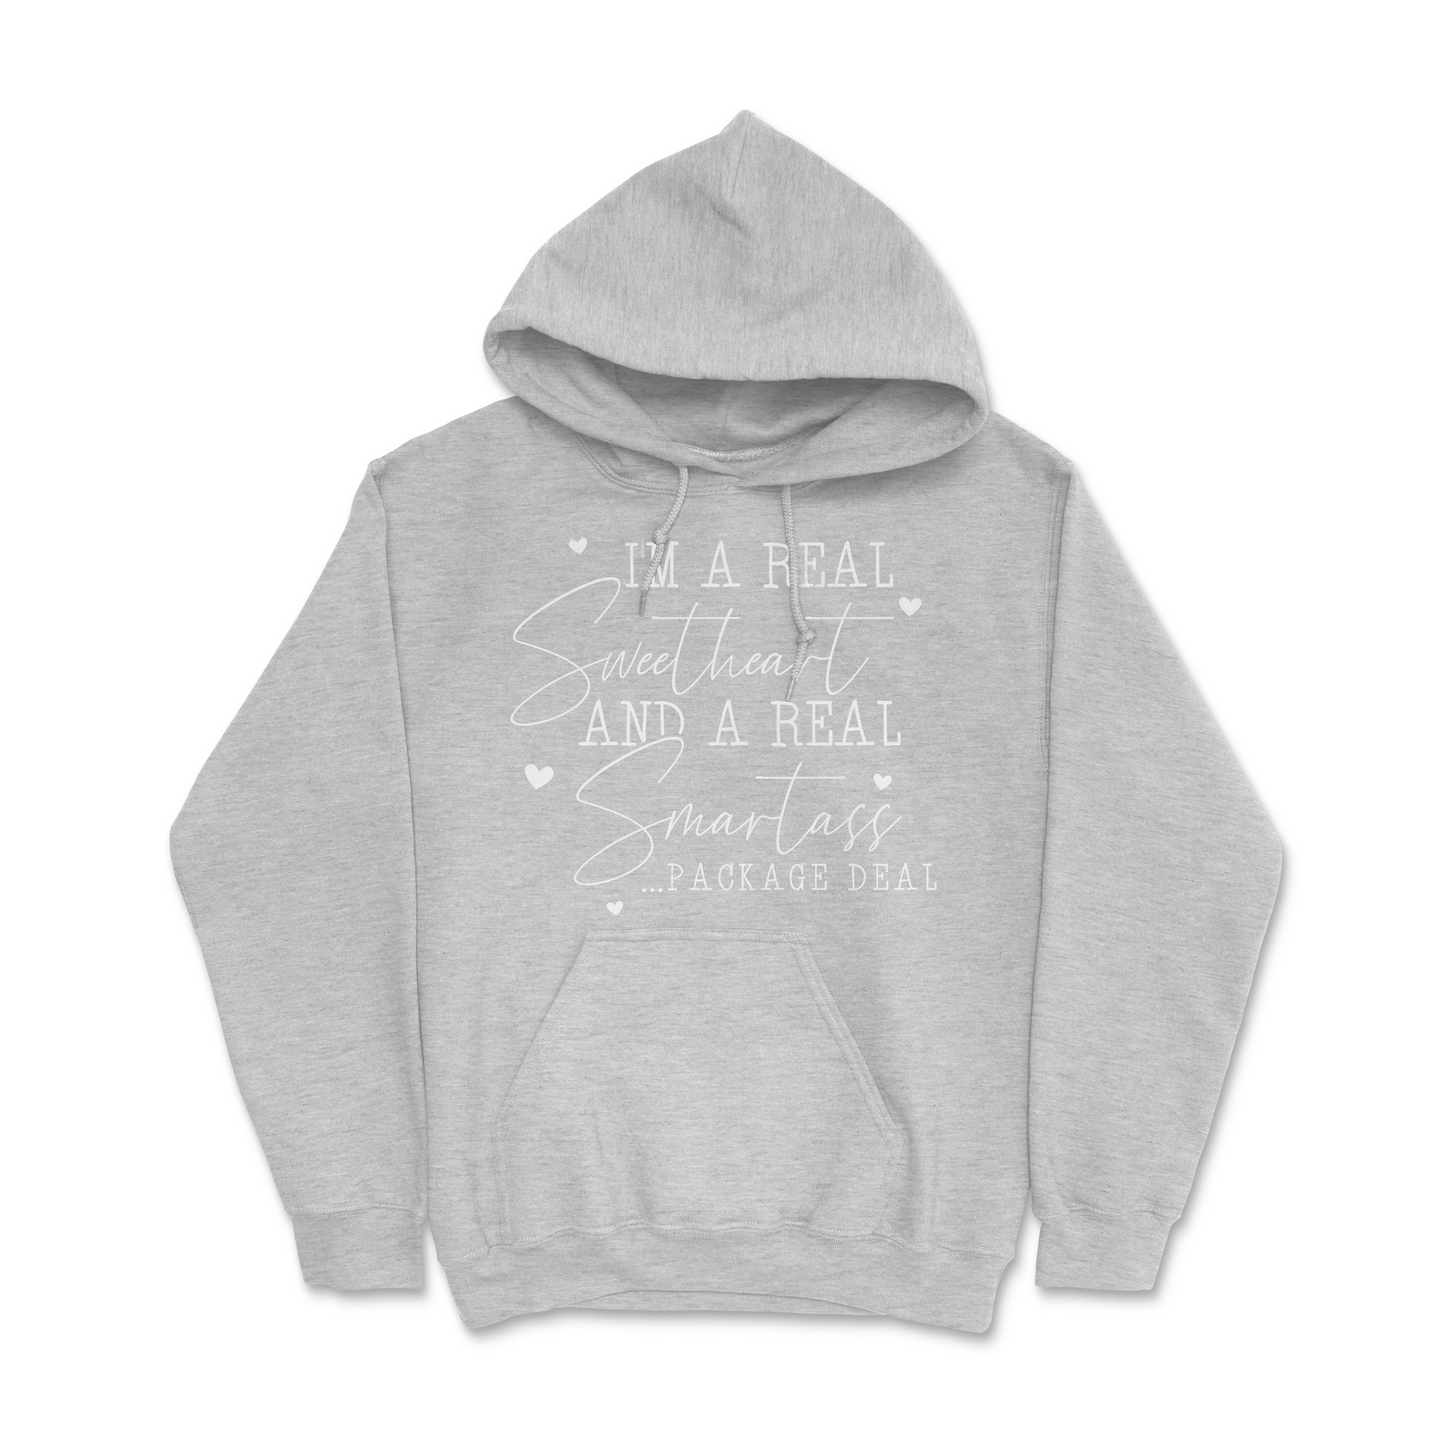 I'm A Real Sweetheart and Smartass Package Deal Hoodie